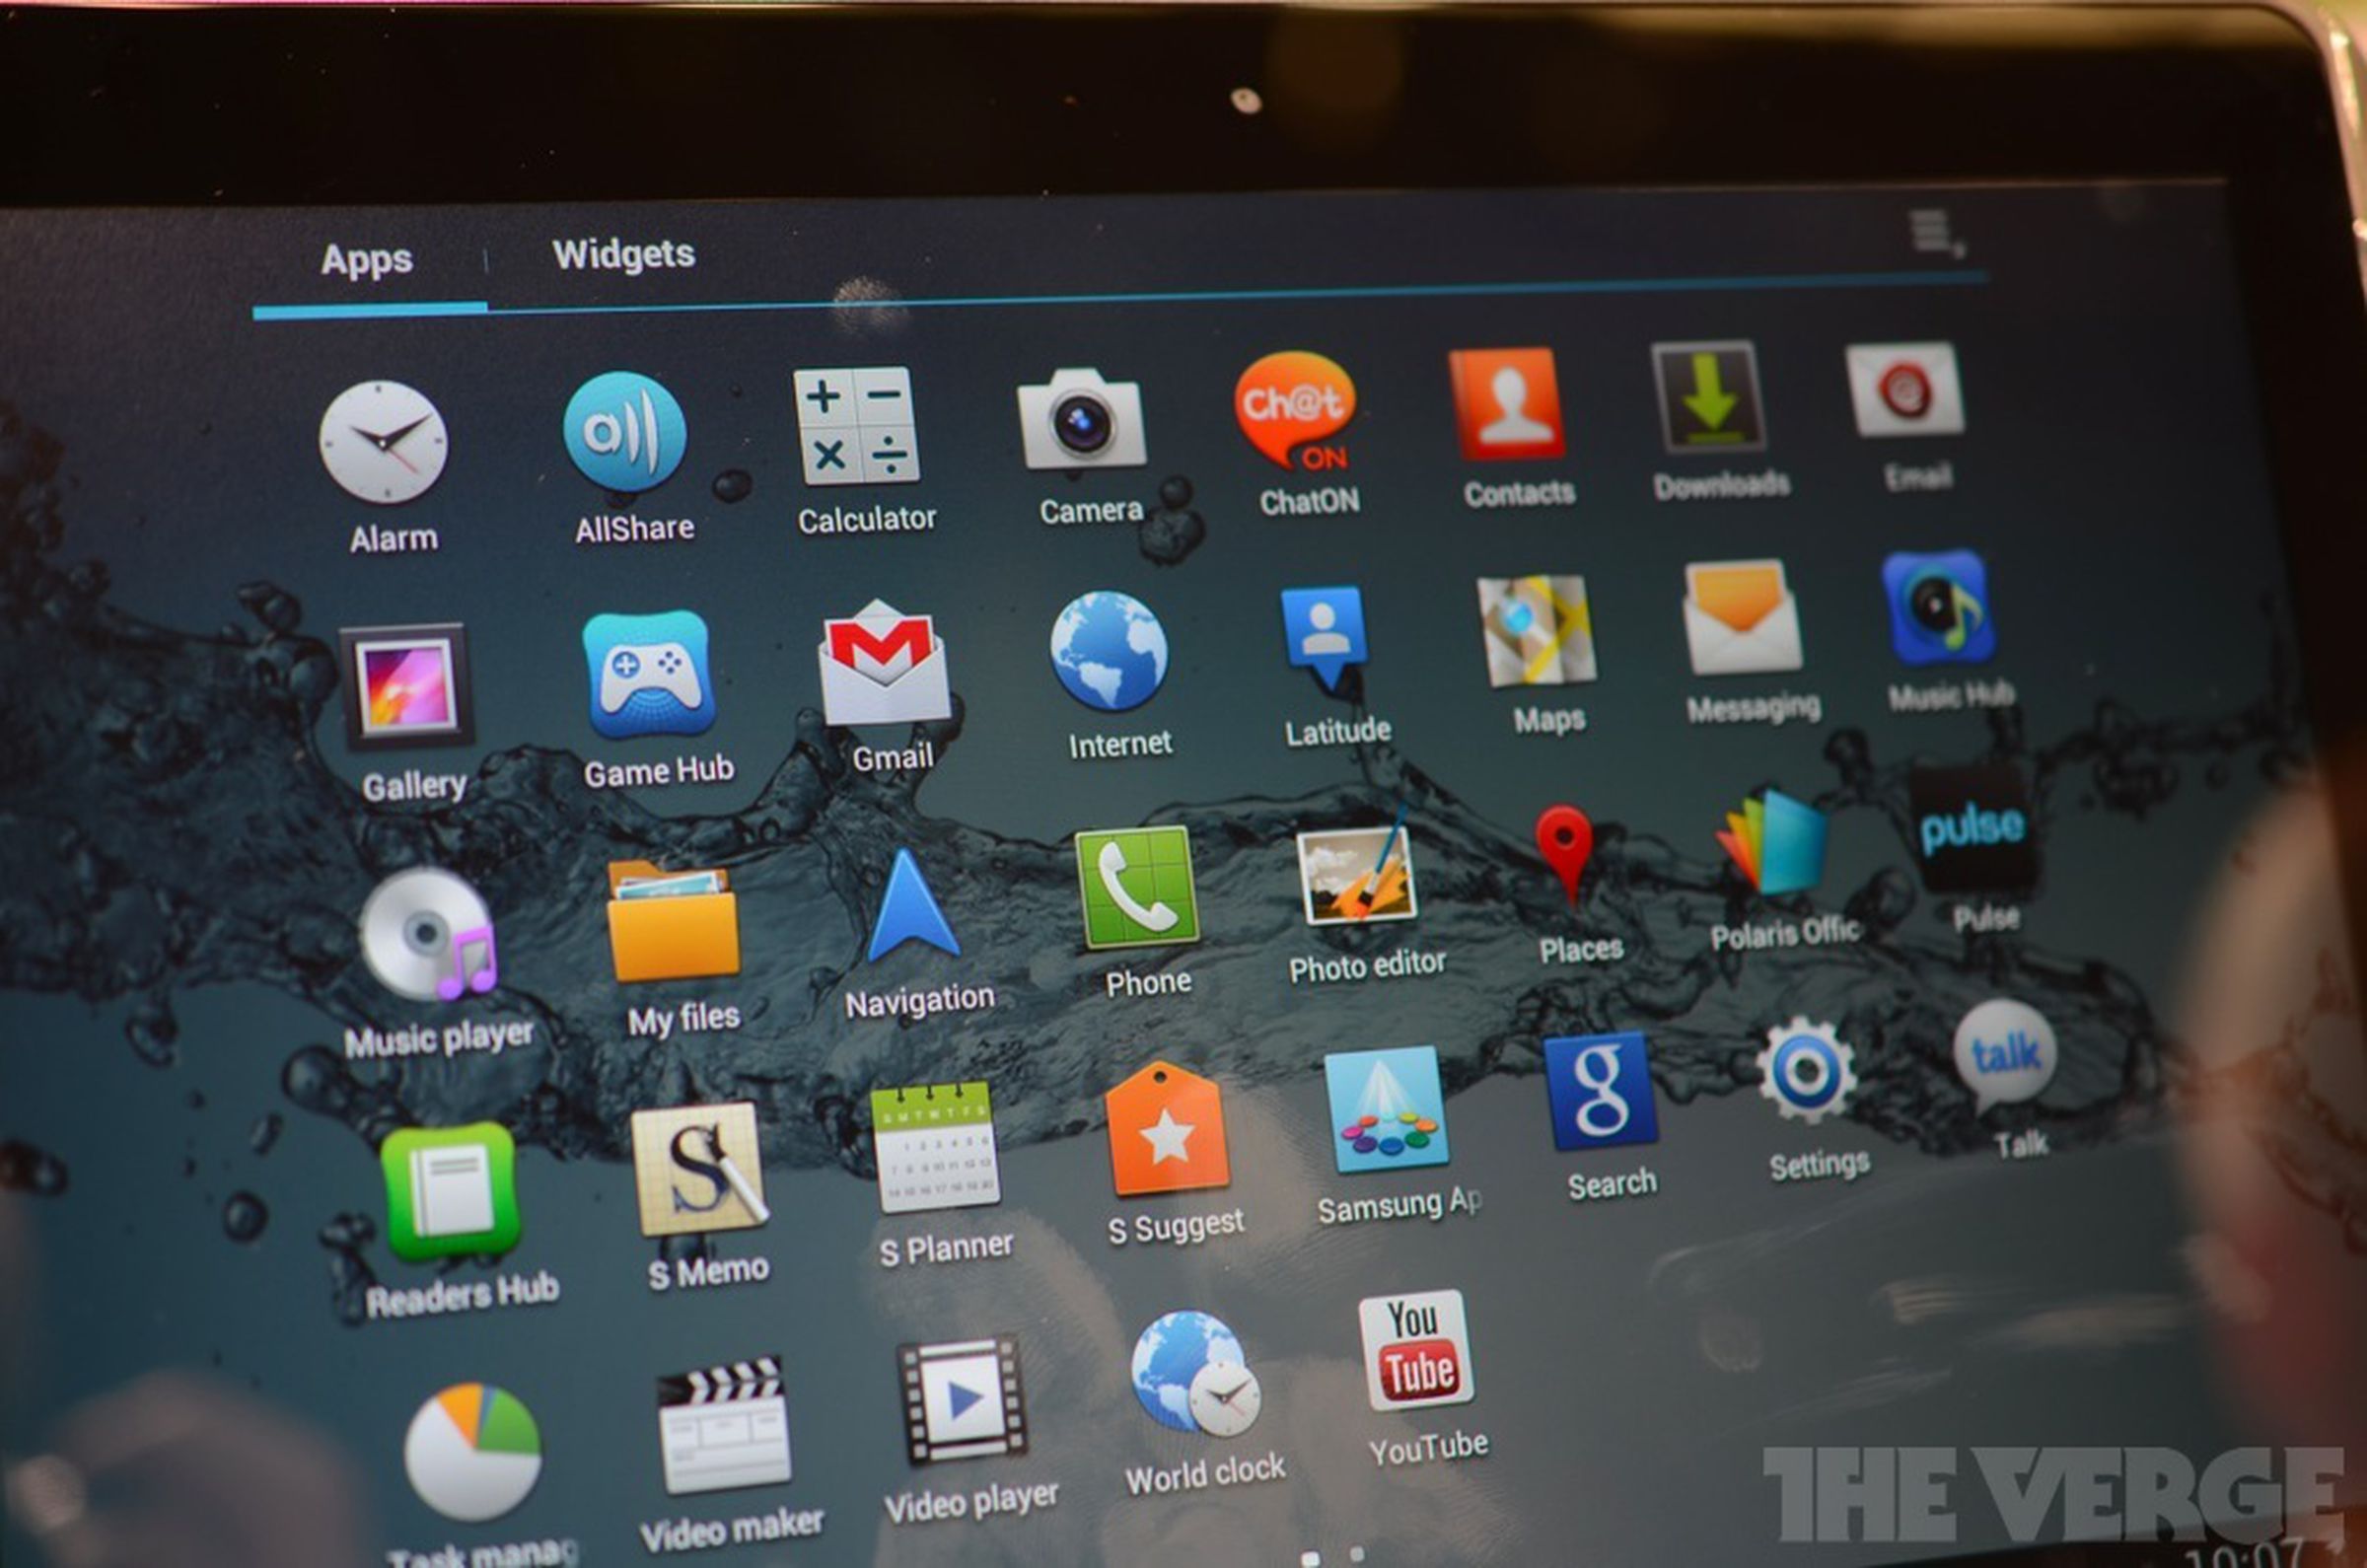 Samsung Galaxy Tab 7.0 and 10.1 hands-on pictures